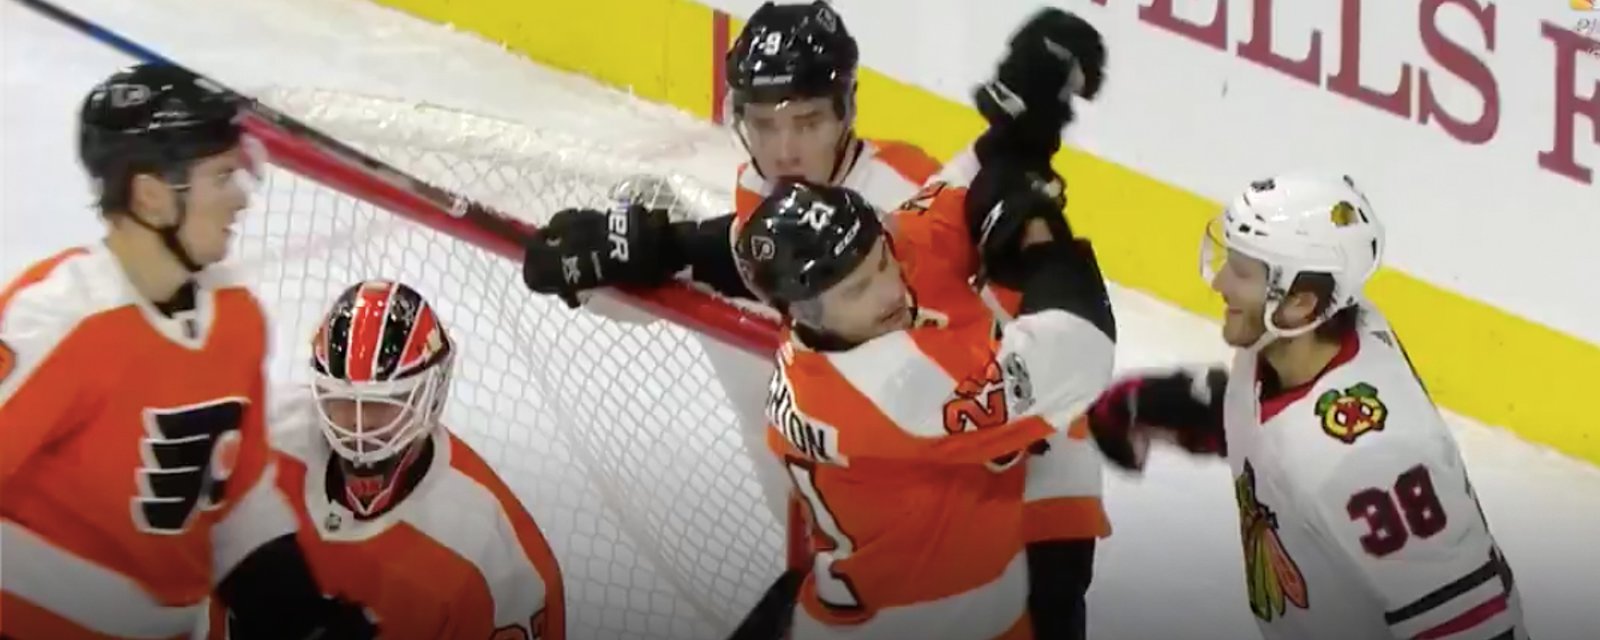 Must see: Hartman makes a complete fool out of Flyers forward